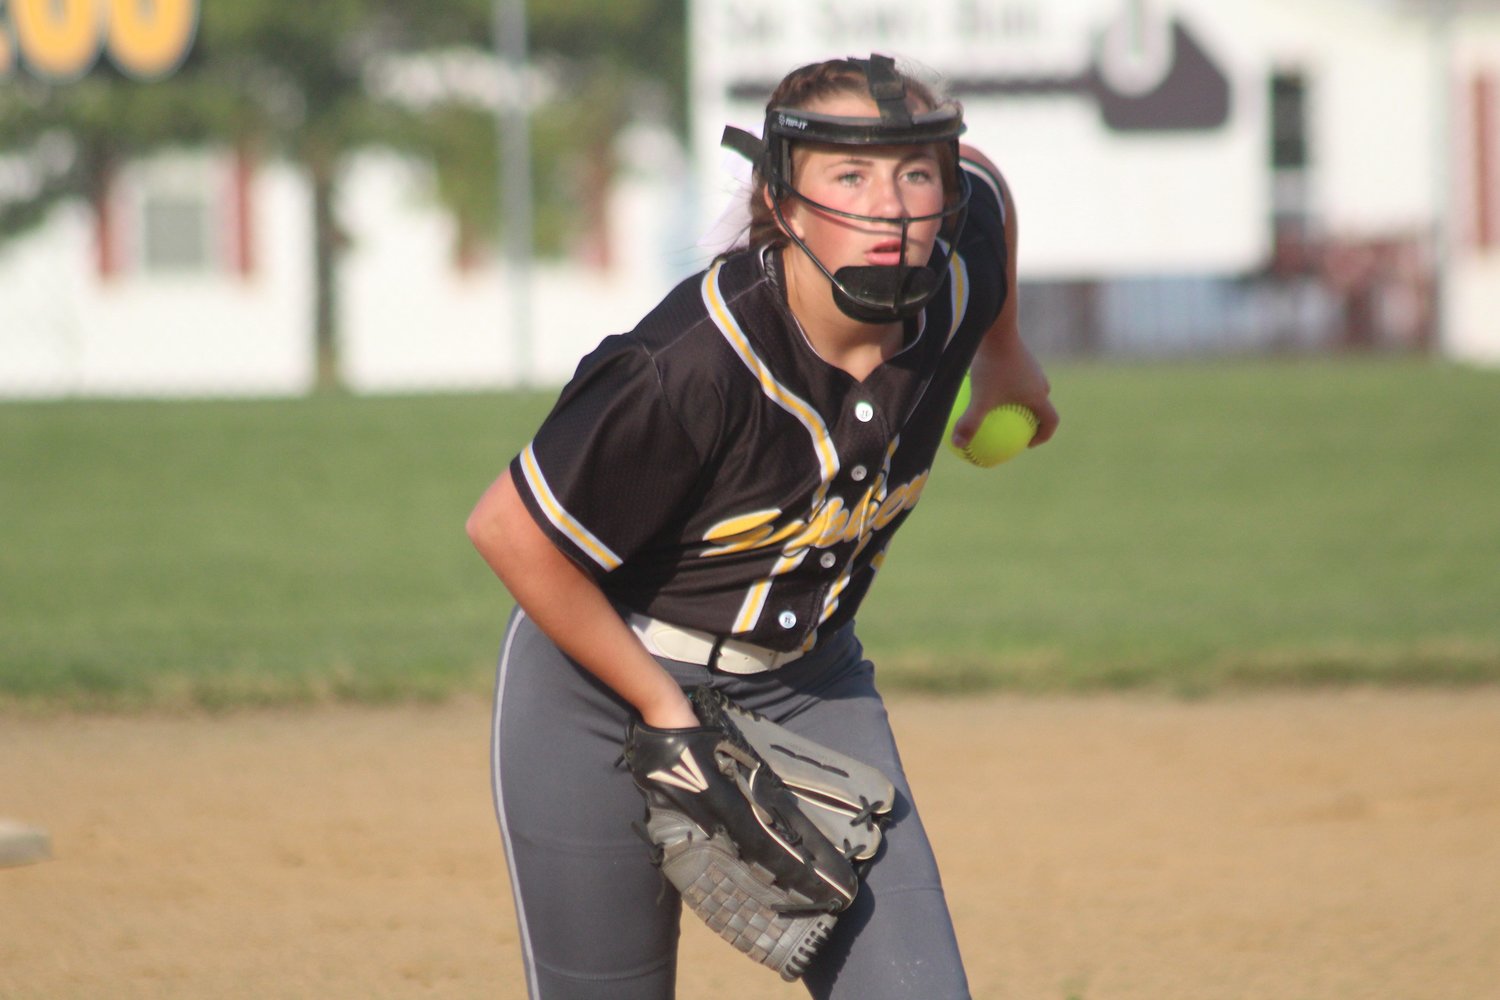 Daily Express file photo of Green City pitcher Paige Pialet.